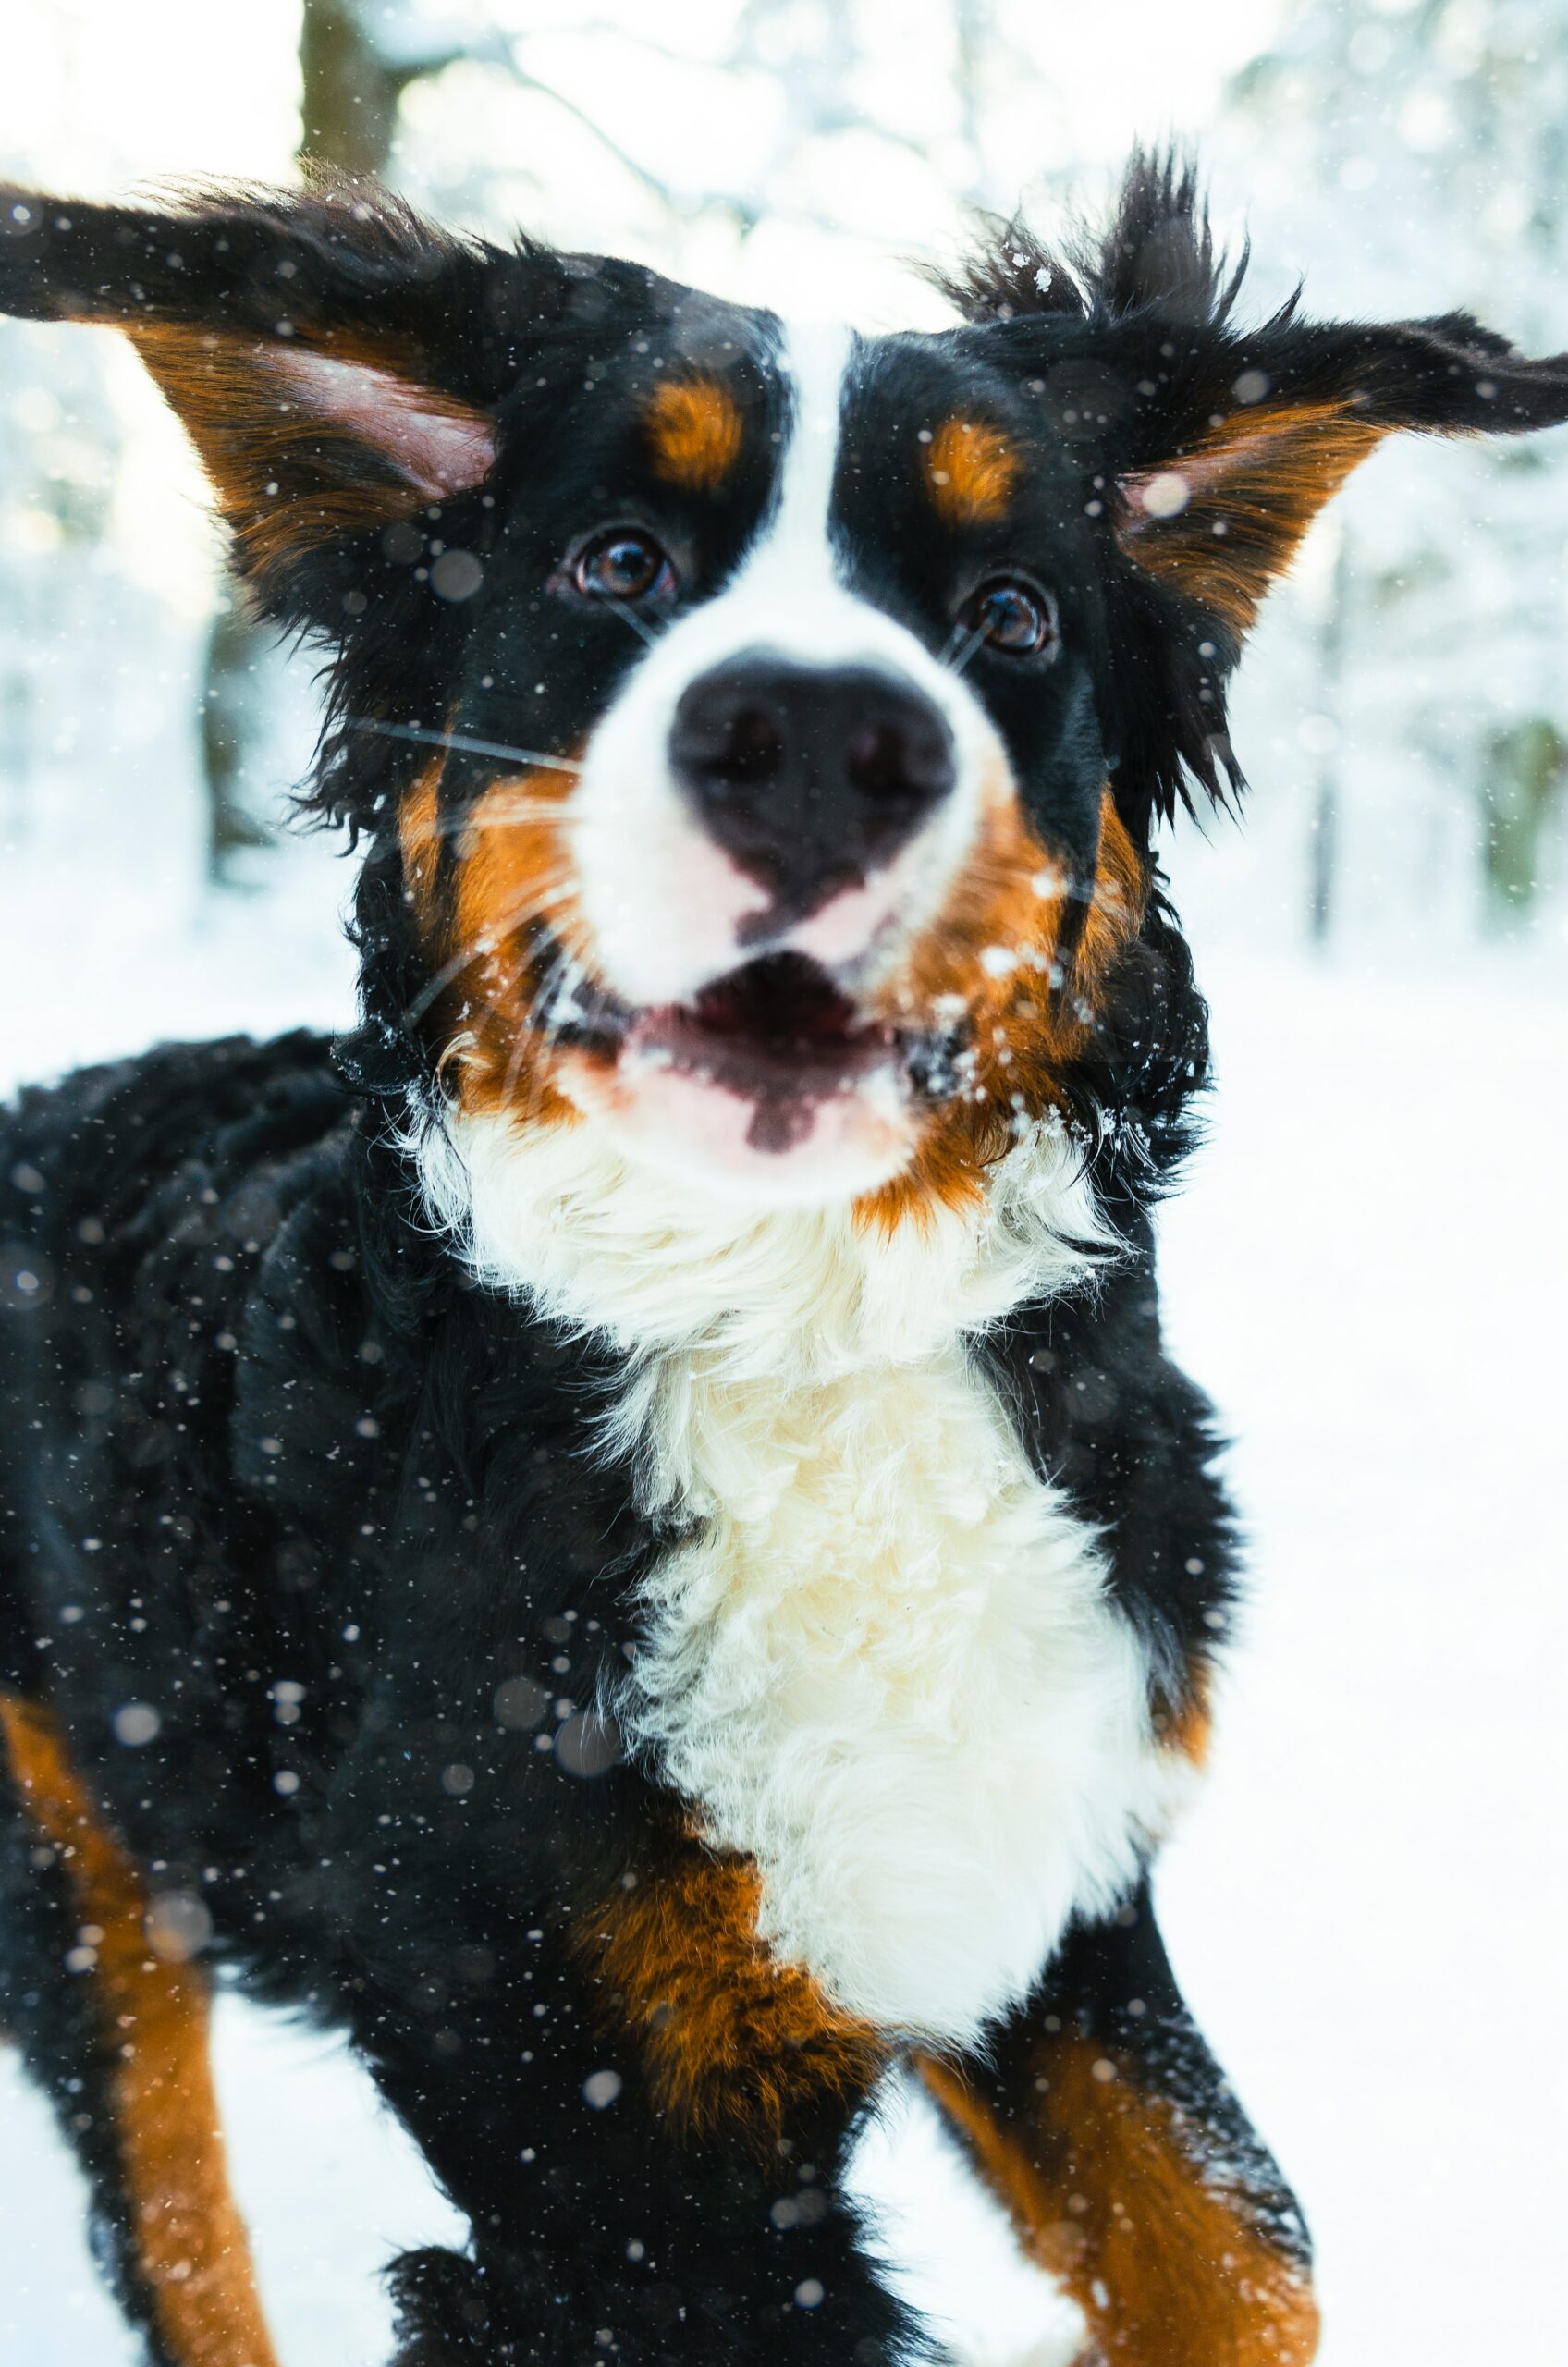 Making the Most of the Winter with Your Pup